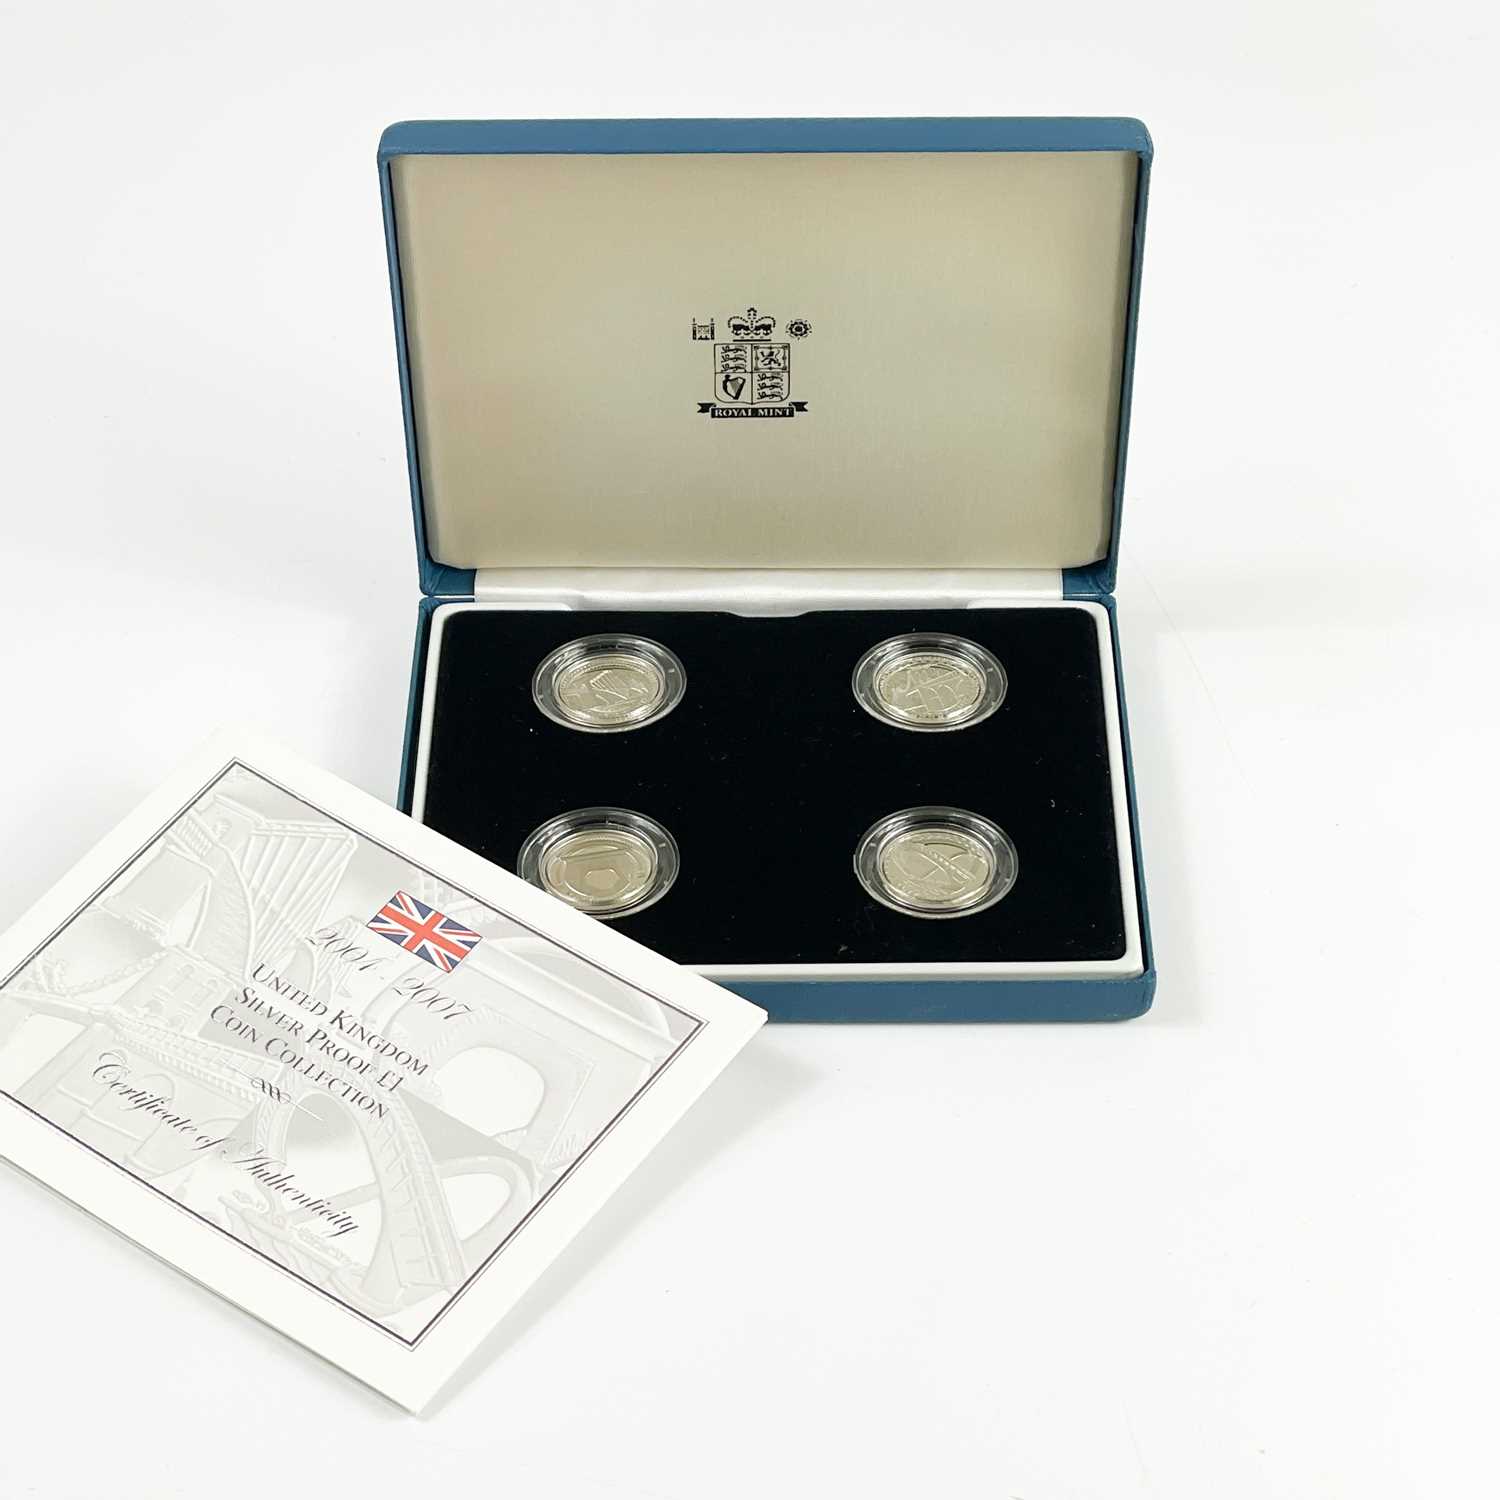 UK Silver Proof £1 Coins 2006 to 2009 (8 coins) in Royal Mint Coin Cases. - Image 2 of 8